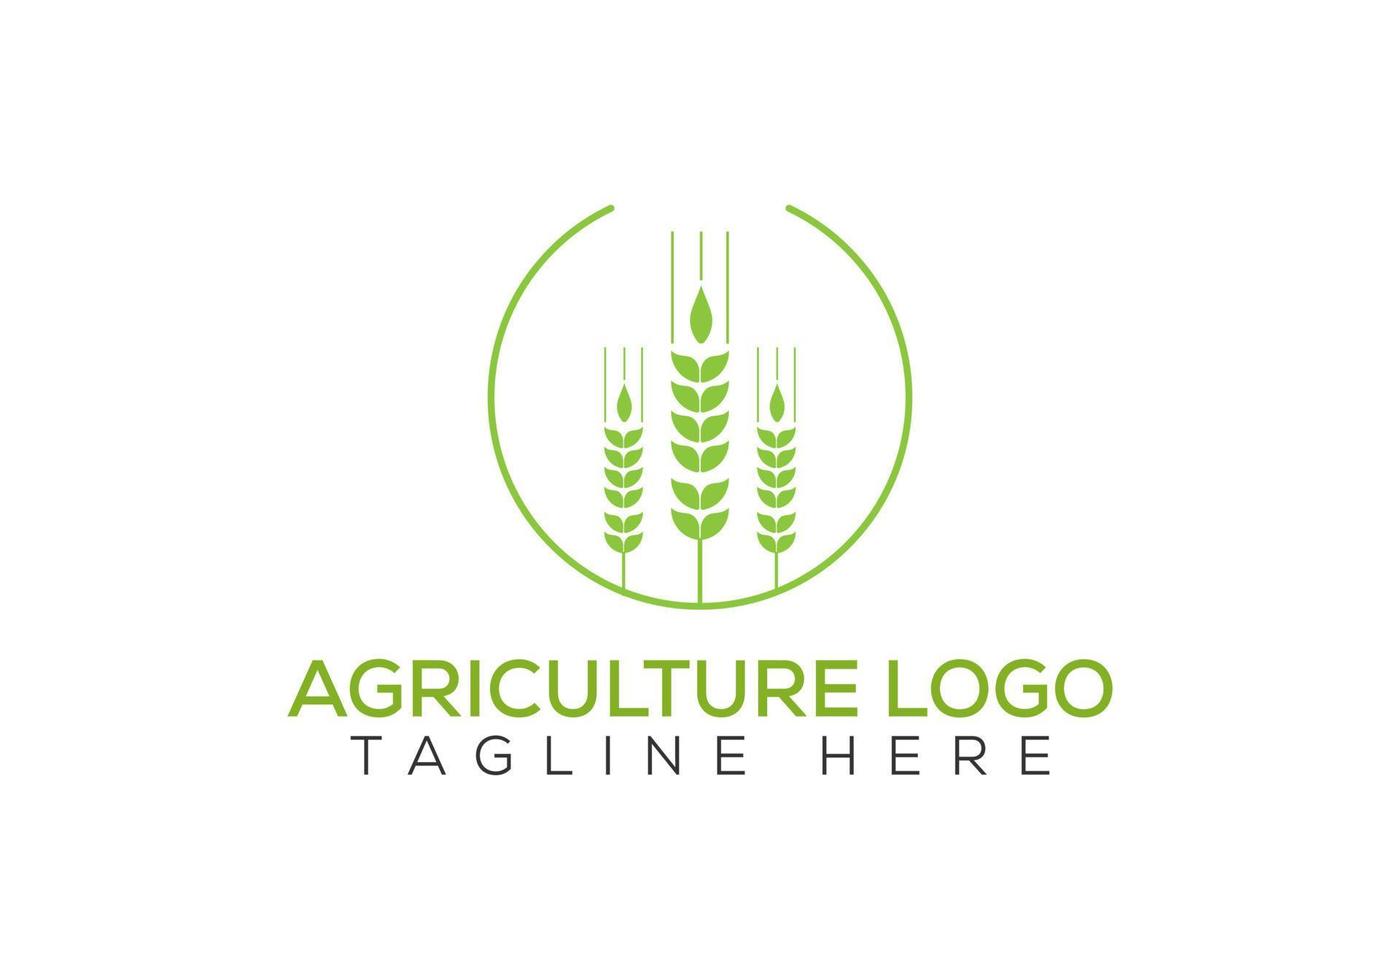 Agriculture Logo Design. Agriculture Sign, Farming Logotype Vector Template